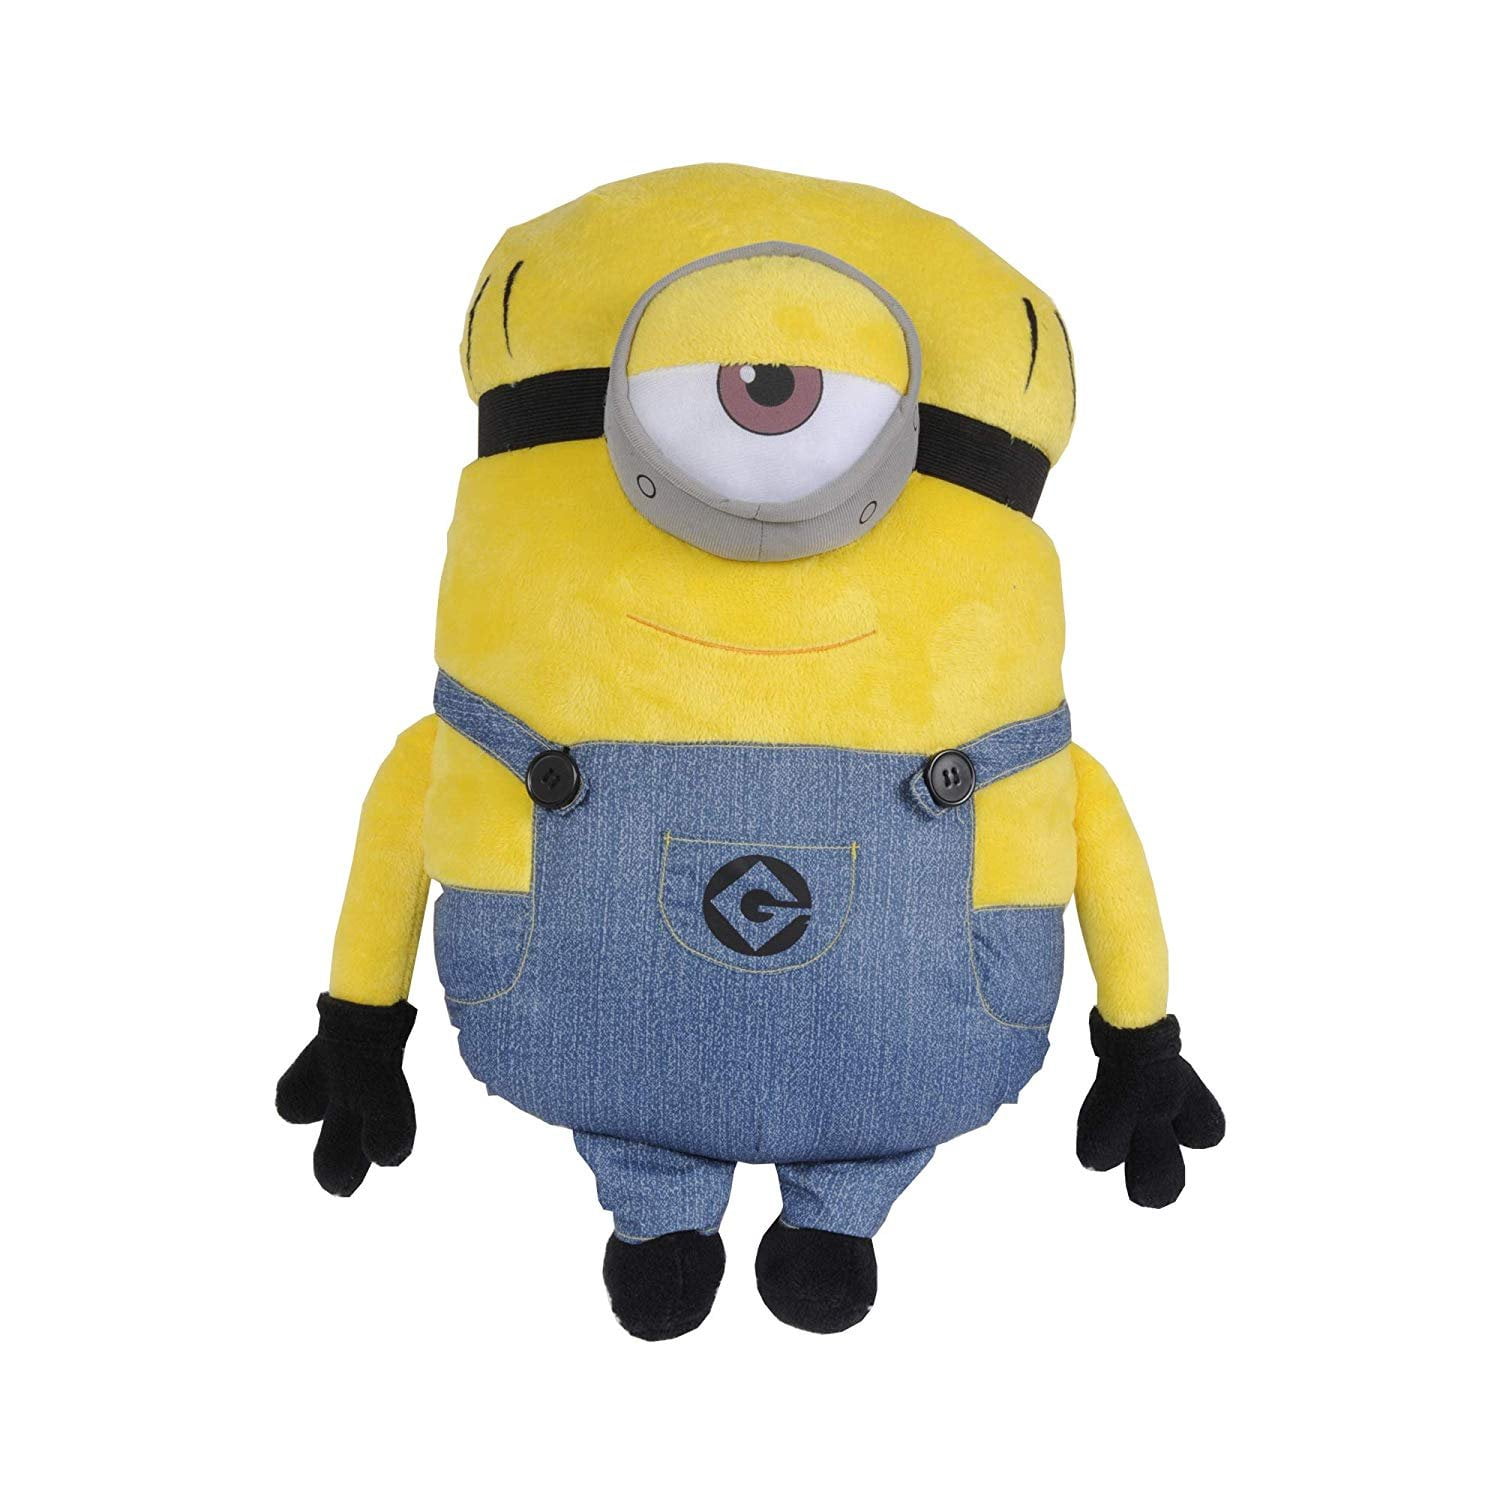  Despicable Me Minions Film   Püsch Animal Fluffy Cuddly  Stuffed Animal   Soft Toy  16 cm Plush Minion  Whitehouse Leisure Despicable Me 2 Agnes Unicorn Approx